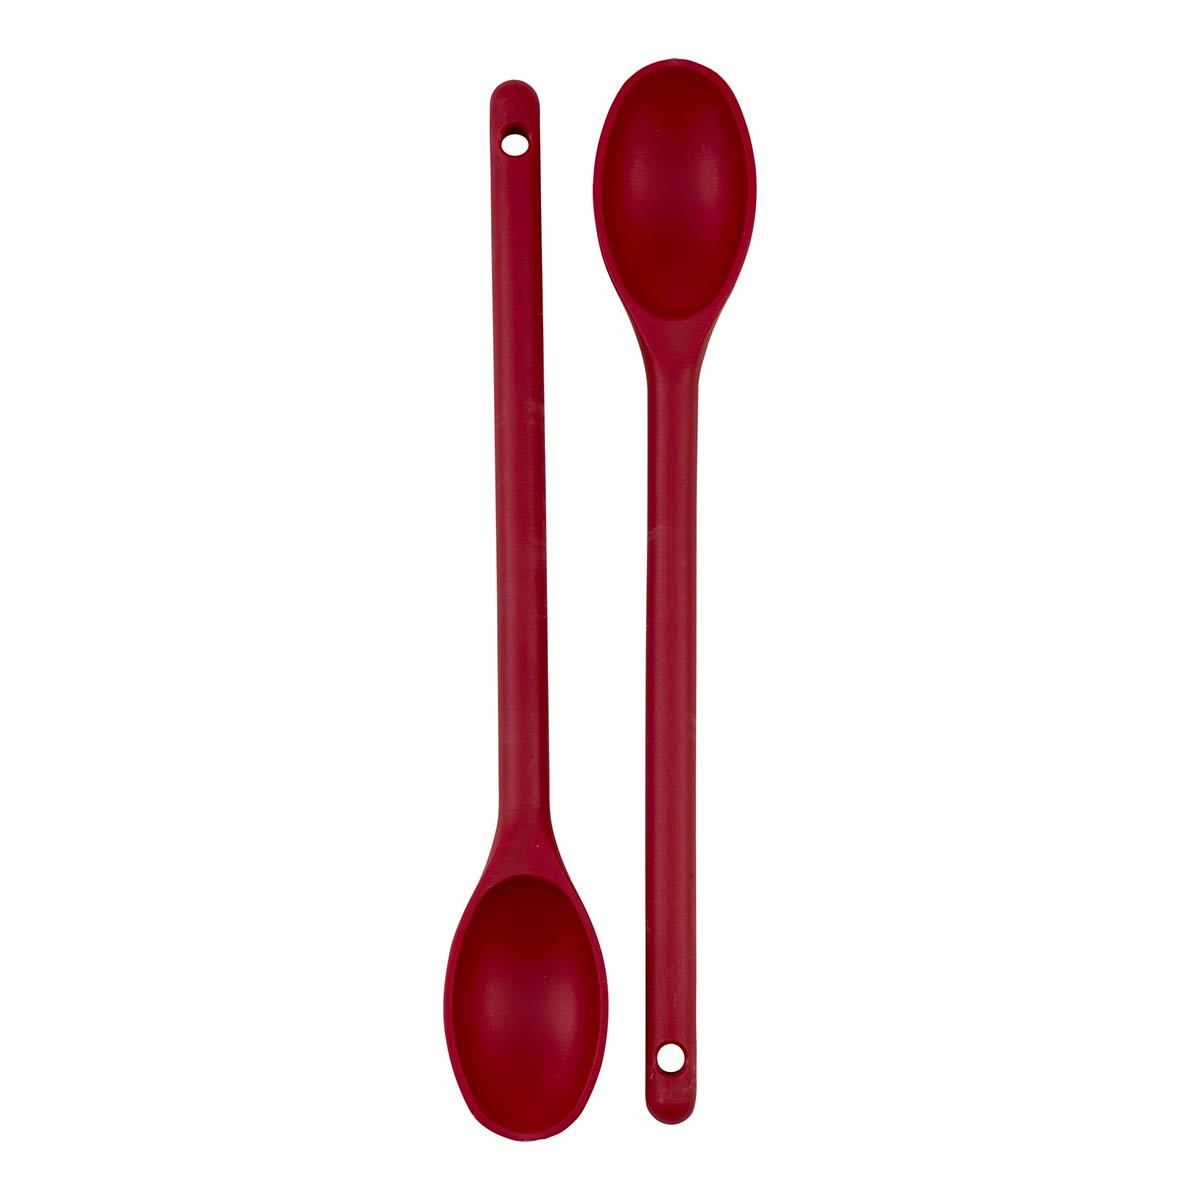 Silicone Nonstick Mixing Spoons Set 2 - Piece,high Heat Resistant